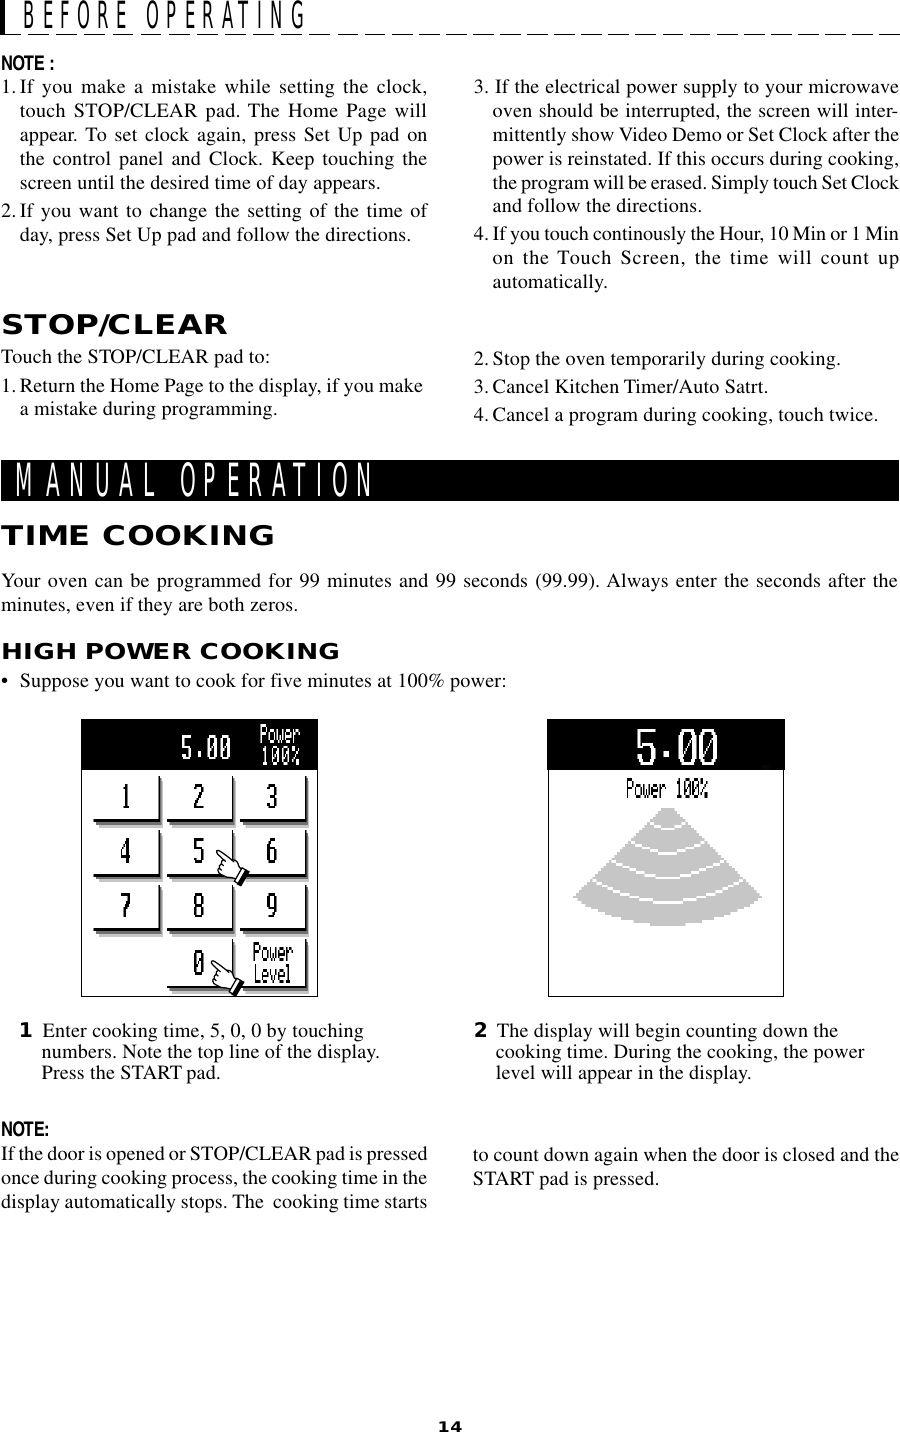 14TIME COOKING1Enter cooking time, 5, 0, 0 by touchingnumbers. Note the top line of the display.Press the START pad.2The display will begin counting down thecooking time. During the cooking, the powerlevel will appear in the display.MANUAL OPERATIONYour oven can be programmed for 99 minutes and 99 seconds (99.99). Always enter the seconds after theminutes, even if they are both zeros.HIGH POWER COOKING• Suppose you want to cook for five minutes at 100% power:NOTE :1.If you make a mistake while setting the clock,touch STOP/CLEAR pad. The Home Page willappear. To set clock again, press Set Up pad onthe control panel and Clock. Keep touching thescreen until the desired time of day appears.2. If you want to change the setting of the time ofday, press Set Up pad and follow the directions.3. If the electrical power supply to your microwaveoven should be interrupted, the screen will inter-mittently show Video Demo or Set Clock after thepower is reinstated. If this occurs during cooking,the program will be erased. Simply touch Set Clockand follow the directions.4. If you touch continously the Hour, 10 Min or 1 Minon the Touch Screen, the time will count upautomatically.STOP/CLEARTouch the STOP/CLEAR pad to:1. Return the Home Page to the display, if you makea mistake during programming.2. Stop the oven temporarily during cooking.3. Cancel Kitchen Timer/Auto Satrt.4. Cancel a program during cooking, touch twice.BEFORE OPERATINGNOTE:If the door is opened or STOP/CLEAR pad is pressedonce during cooking process, the cooking time in thedisplay automatically stops. The  cooking time startsto count down again when the door is closed and theSTART pad is pressed.